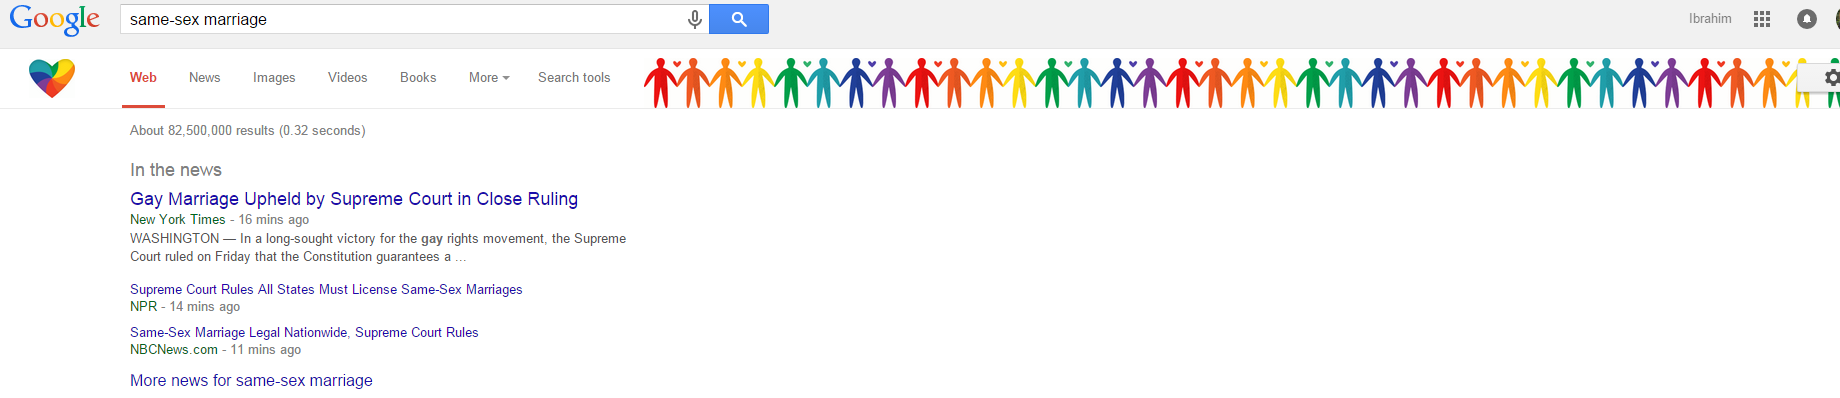 This is what Google looks like to 'same-sex marriage' searchers